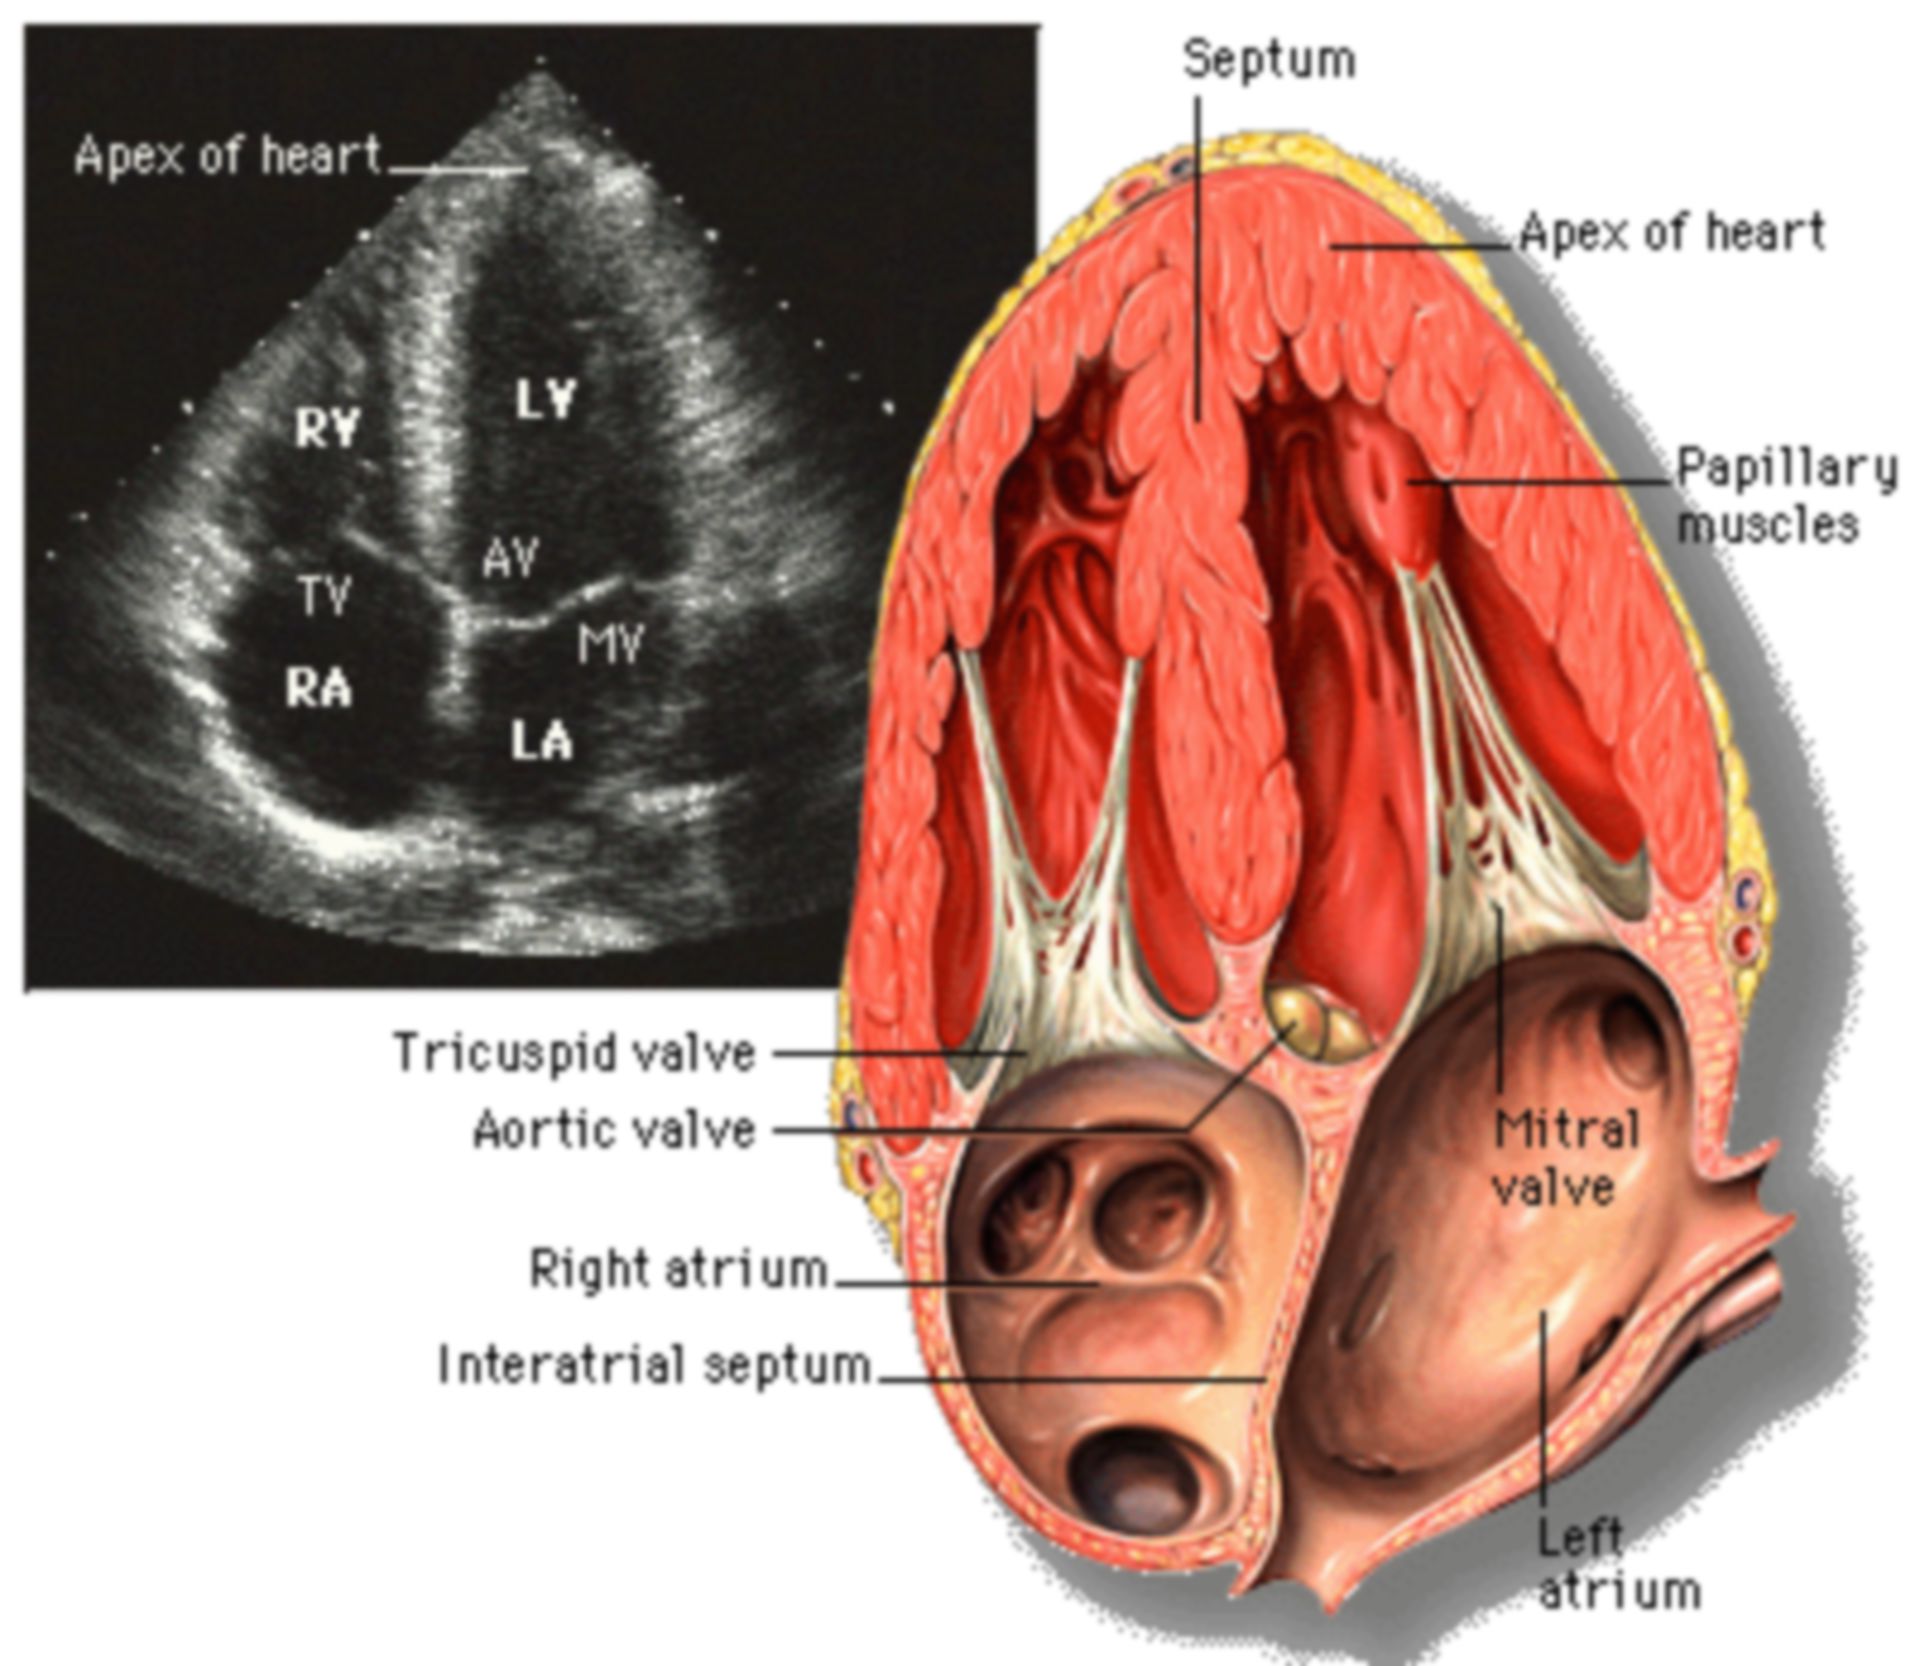 Apical four chamber view of the heart